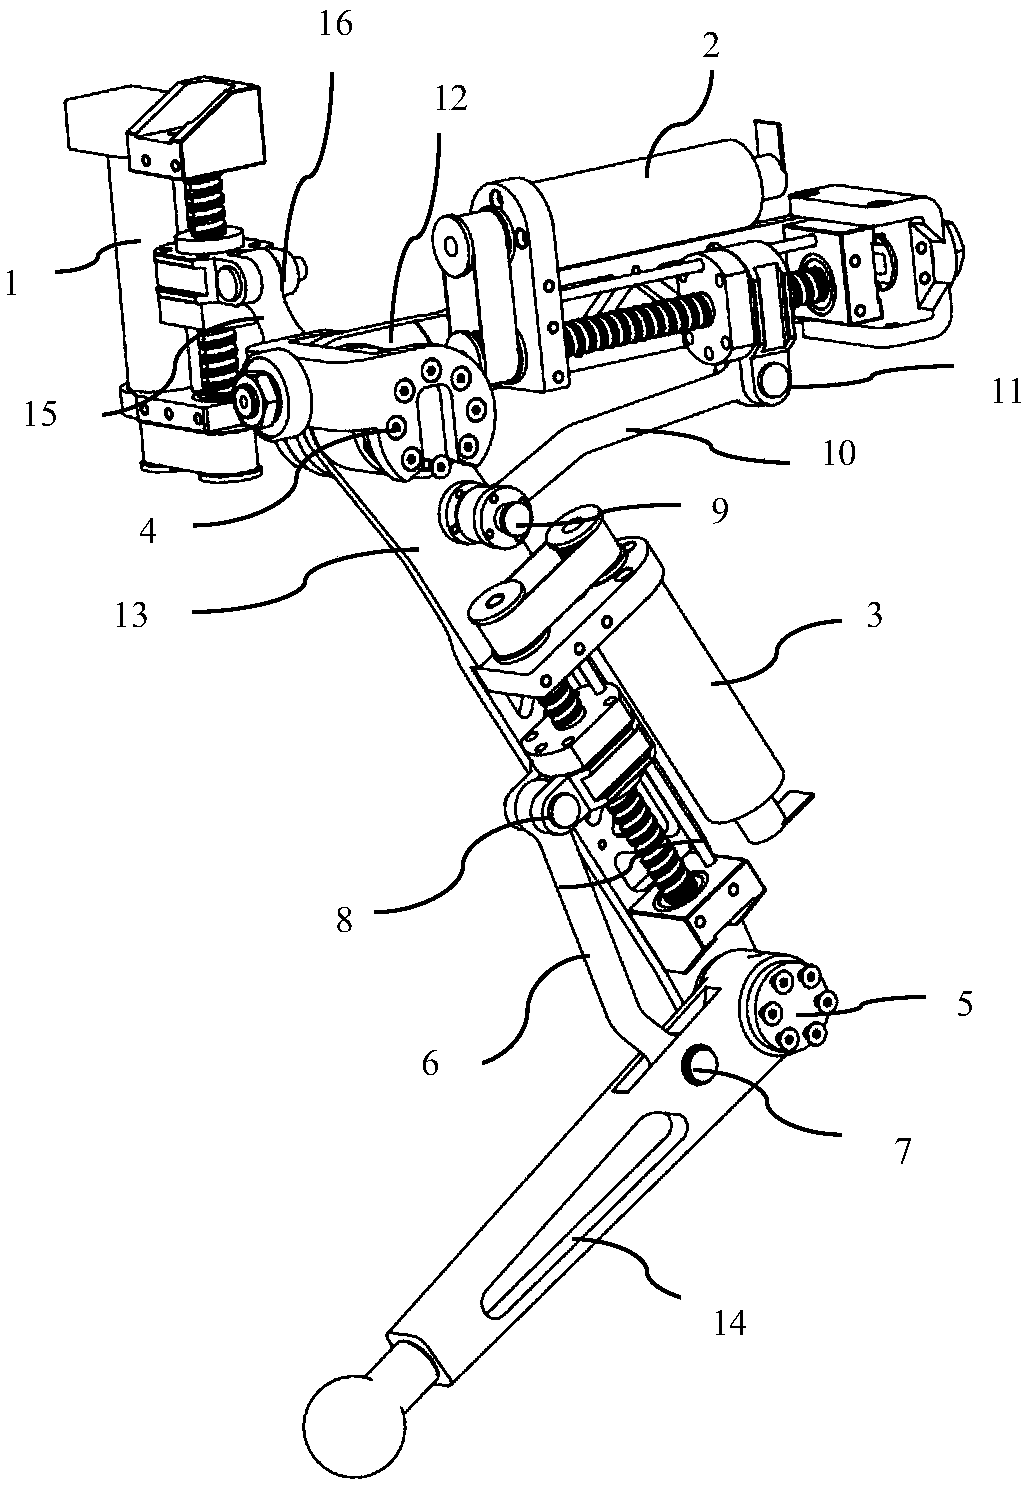 Foot-type robot single-leg device and foot-type robot